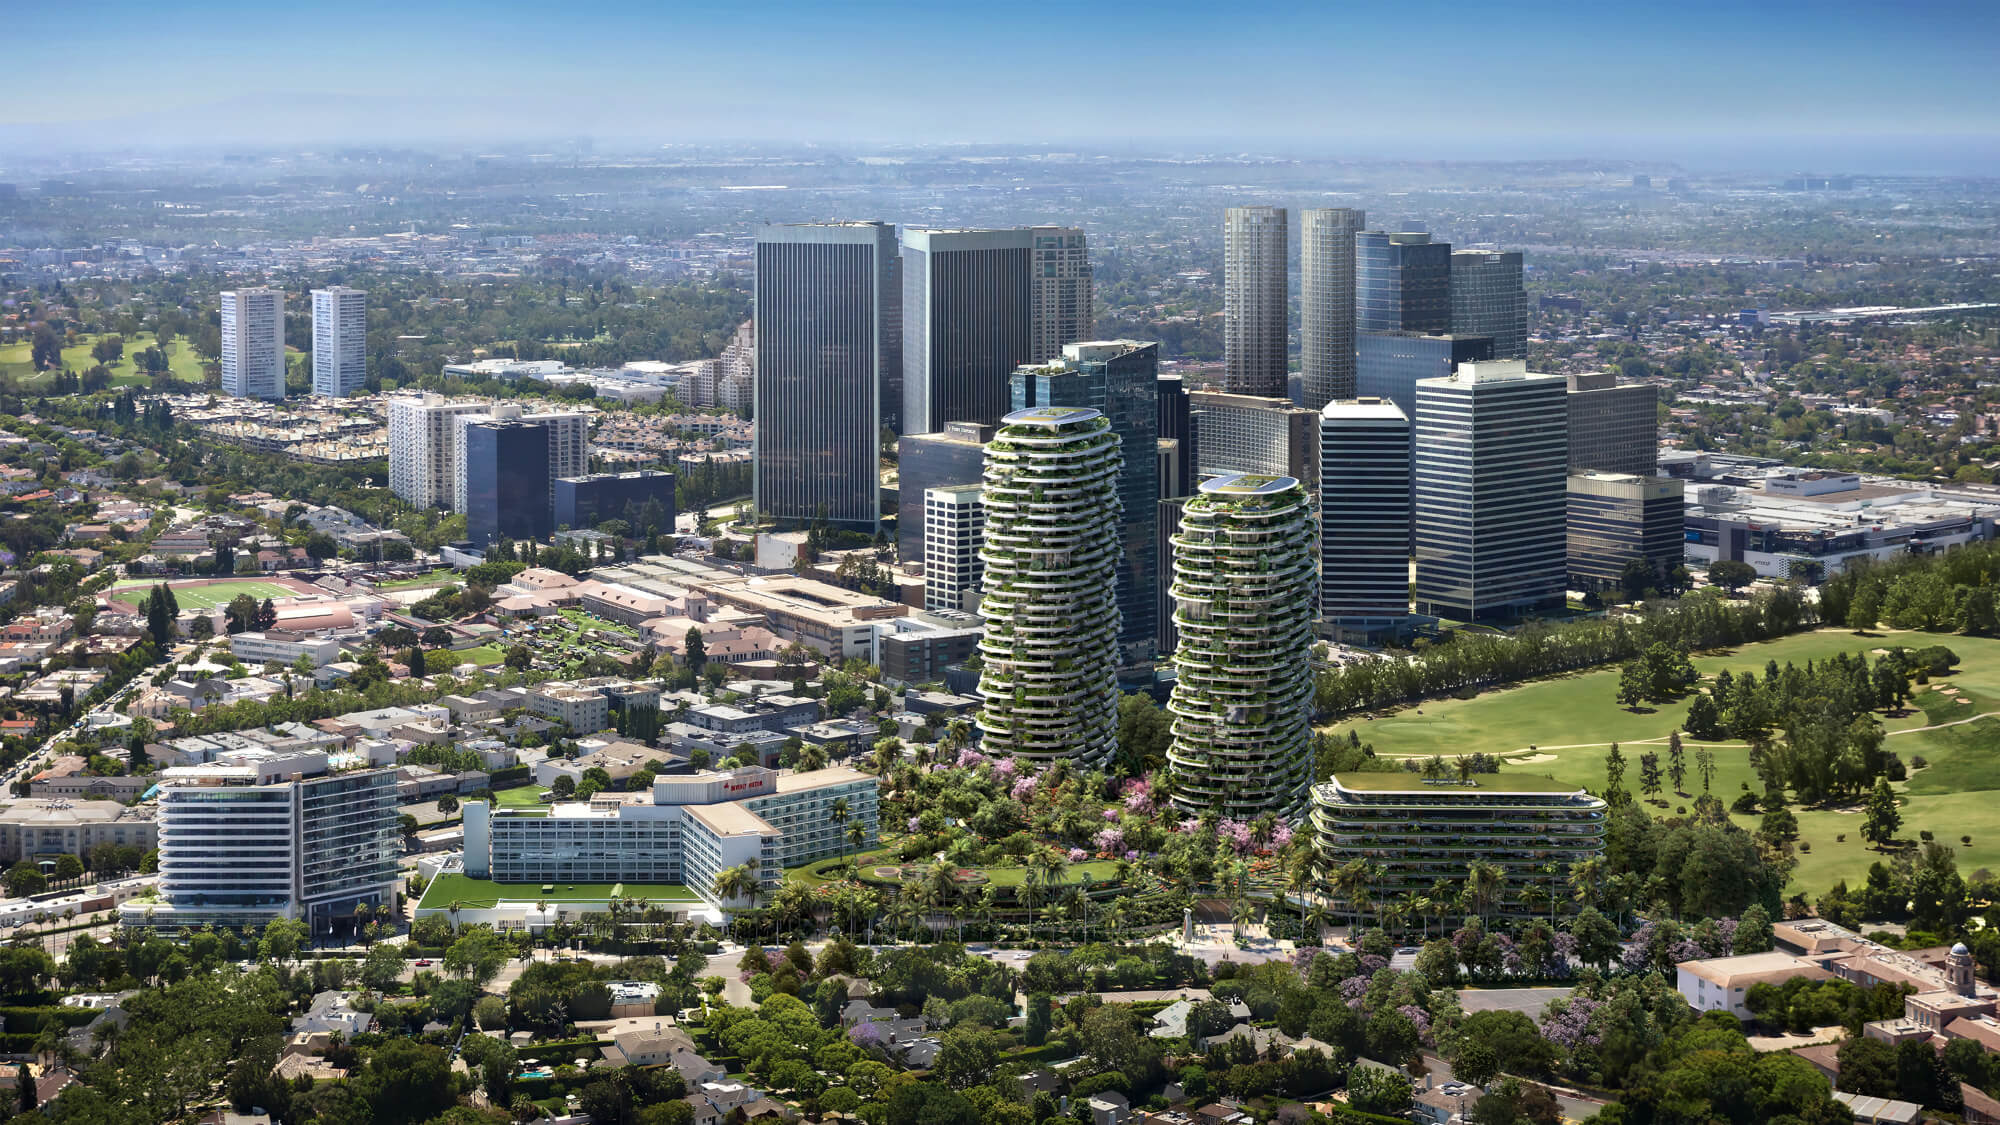 aerial view of development with two plant-clad towers